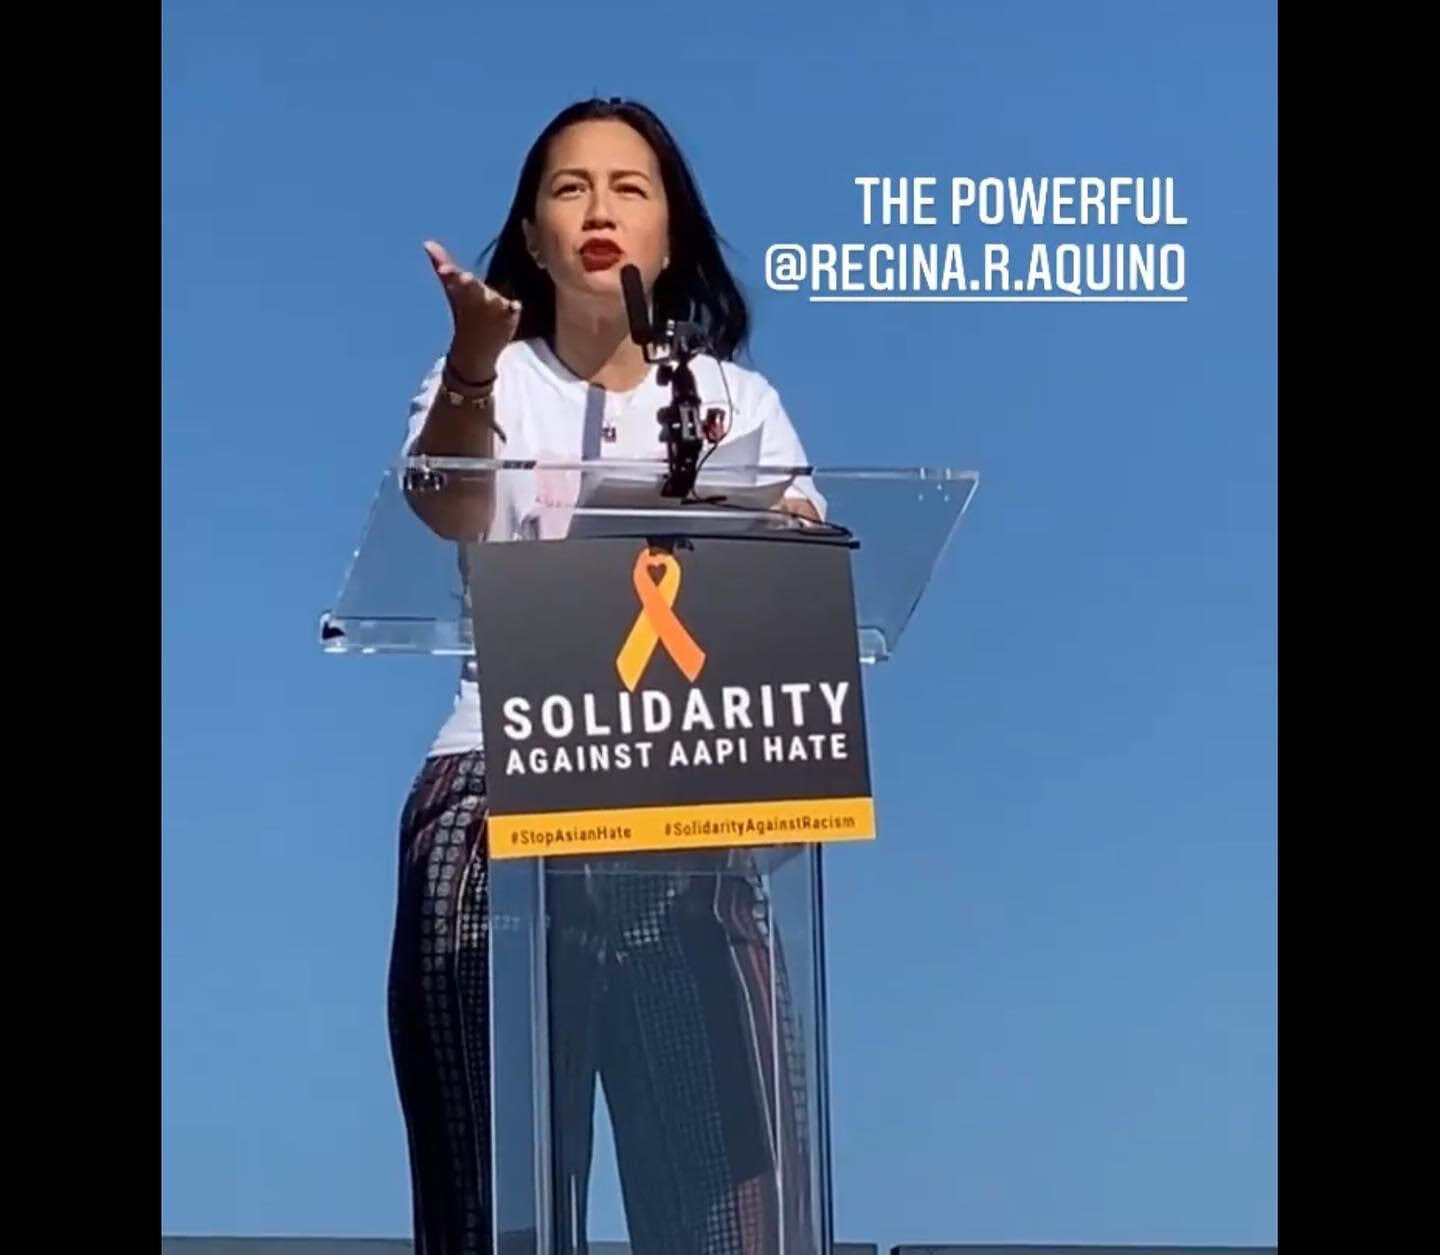 Giving the keynote speech at the Solidarity Against AAPI Hate Rally